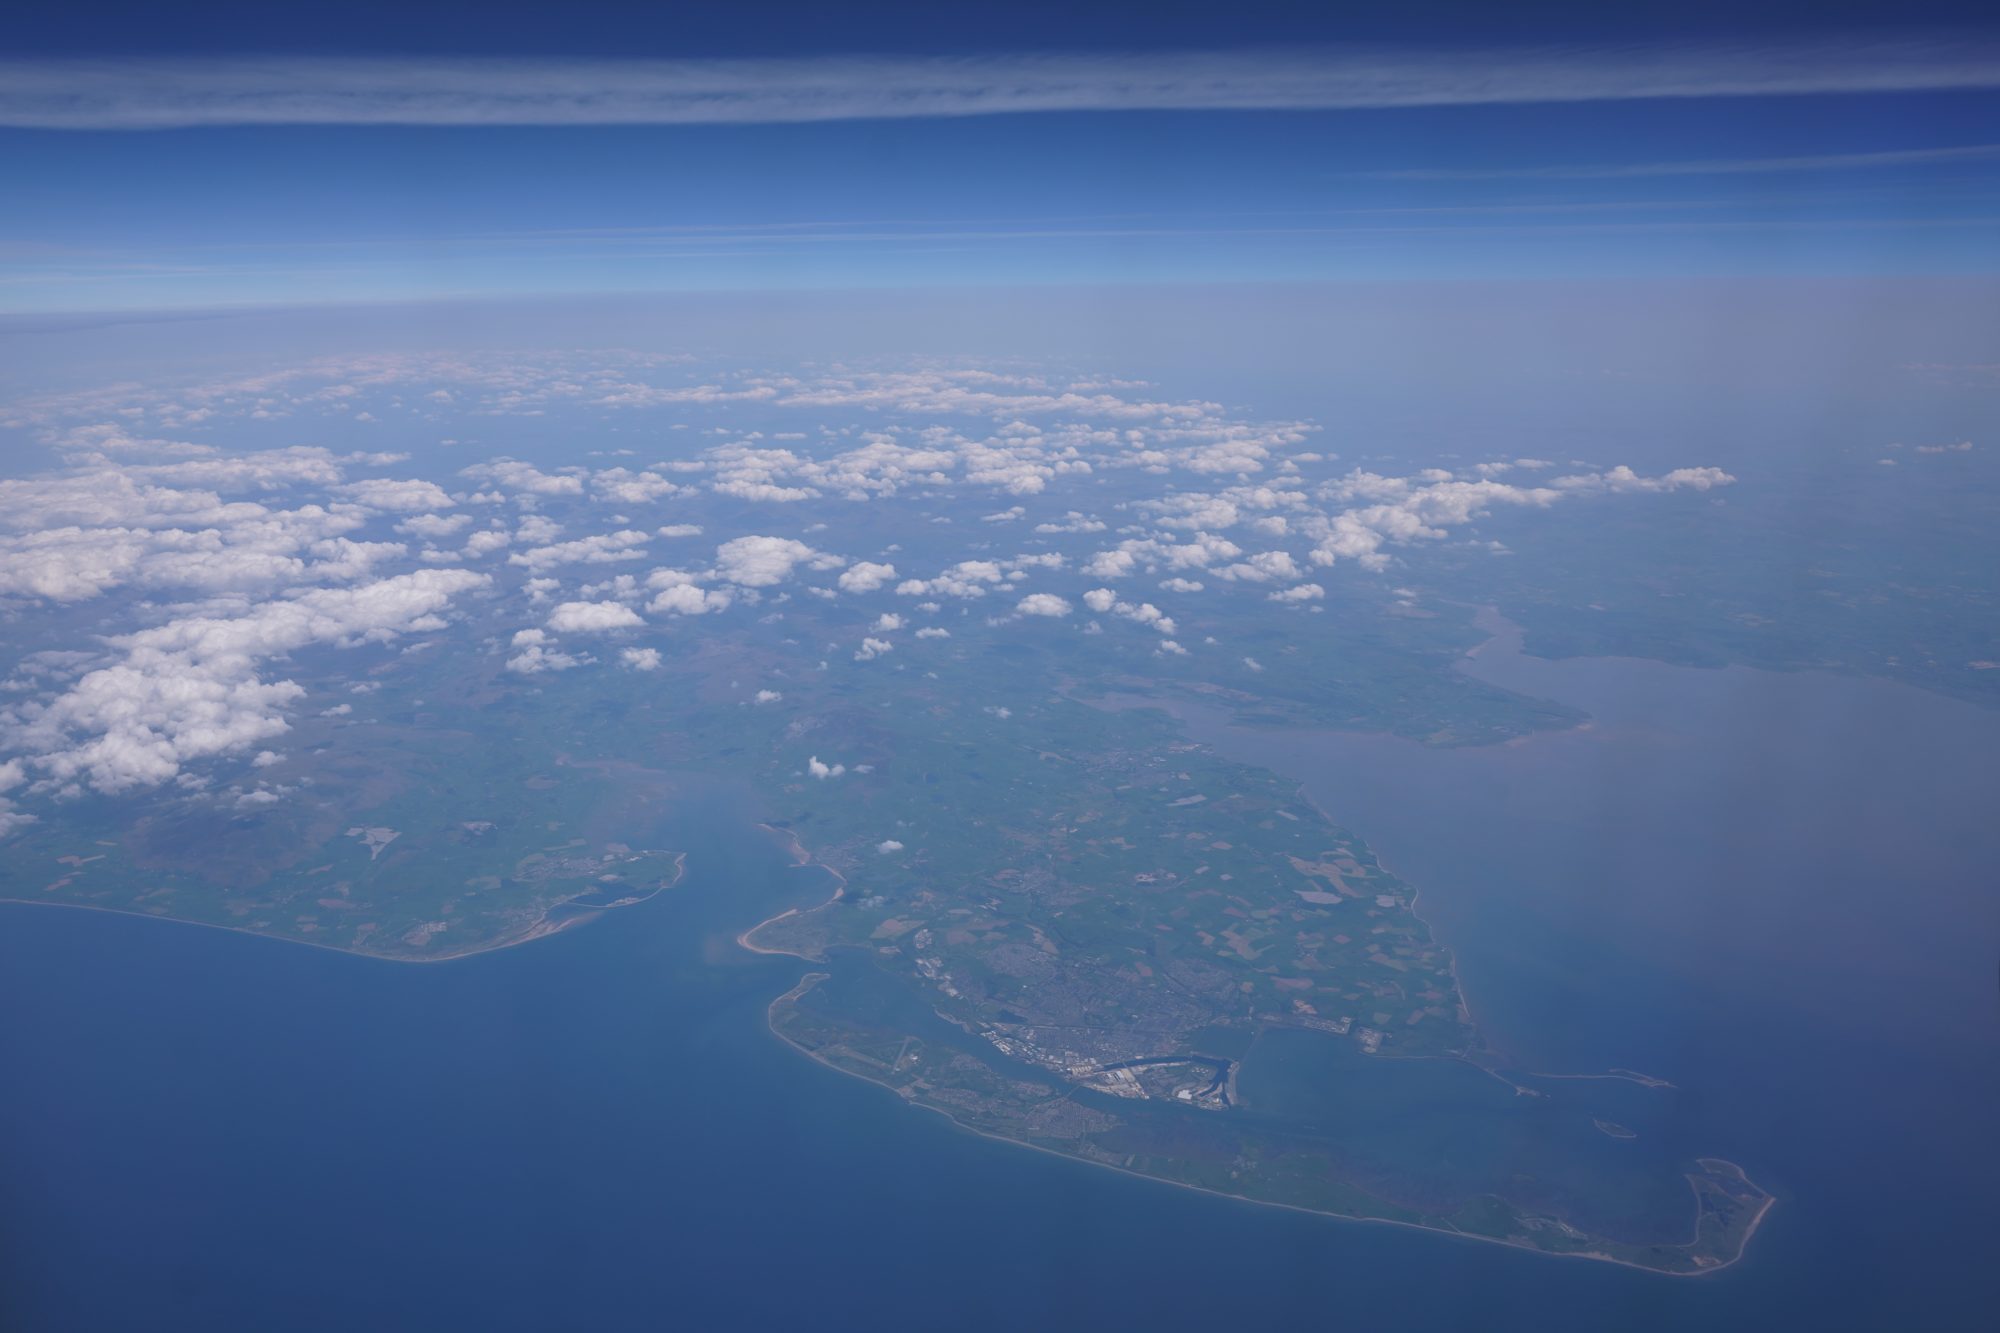 West coast of Britain, seen from the plane